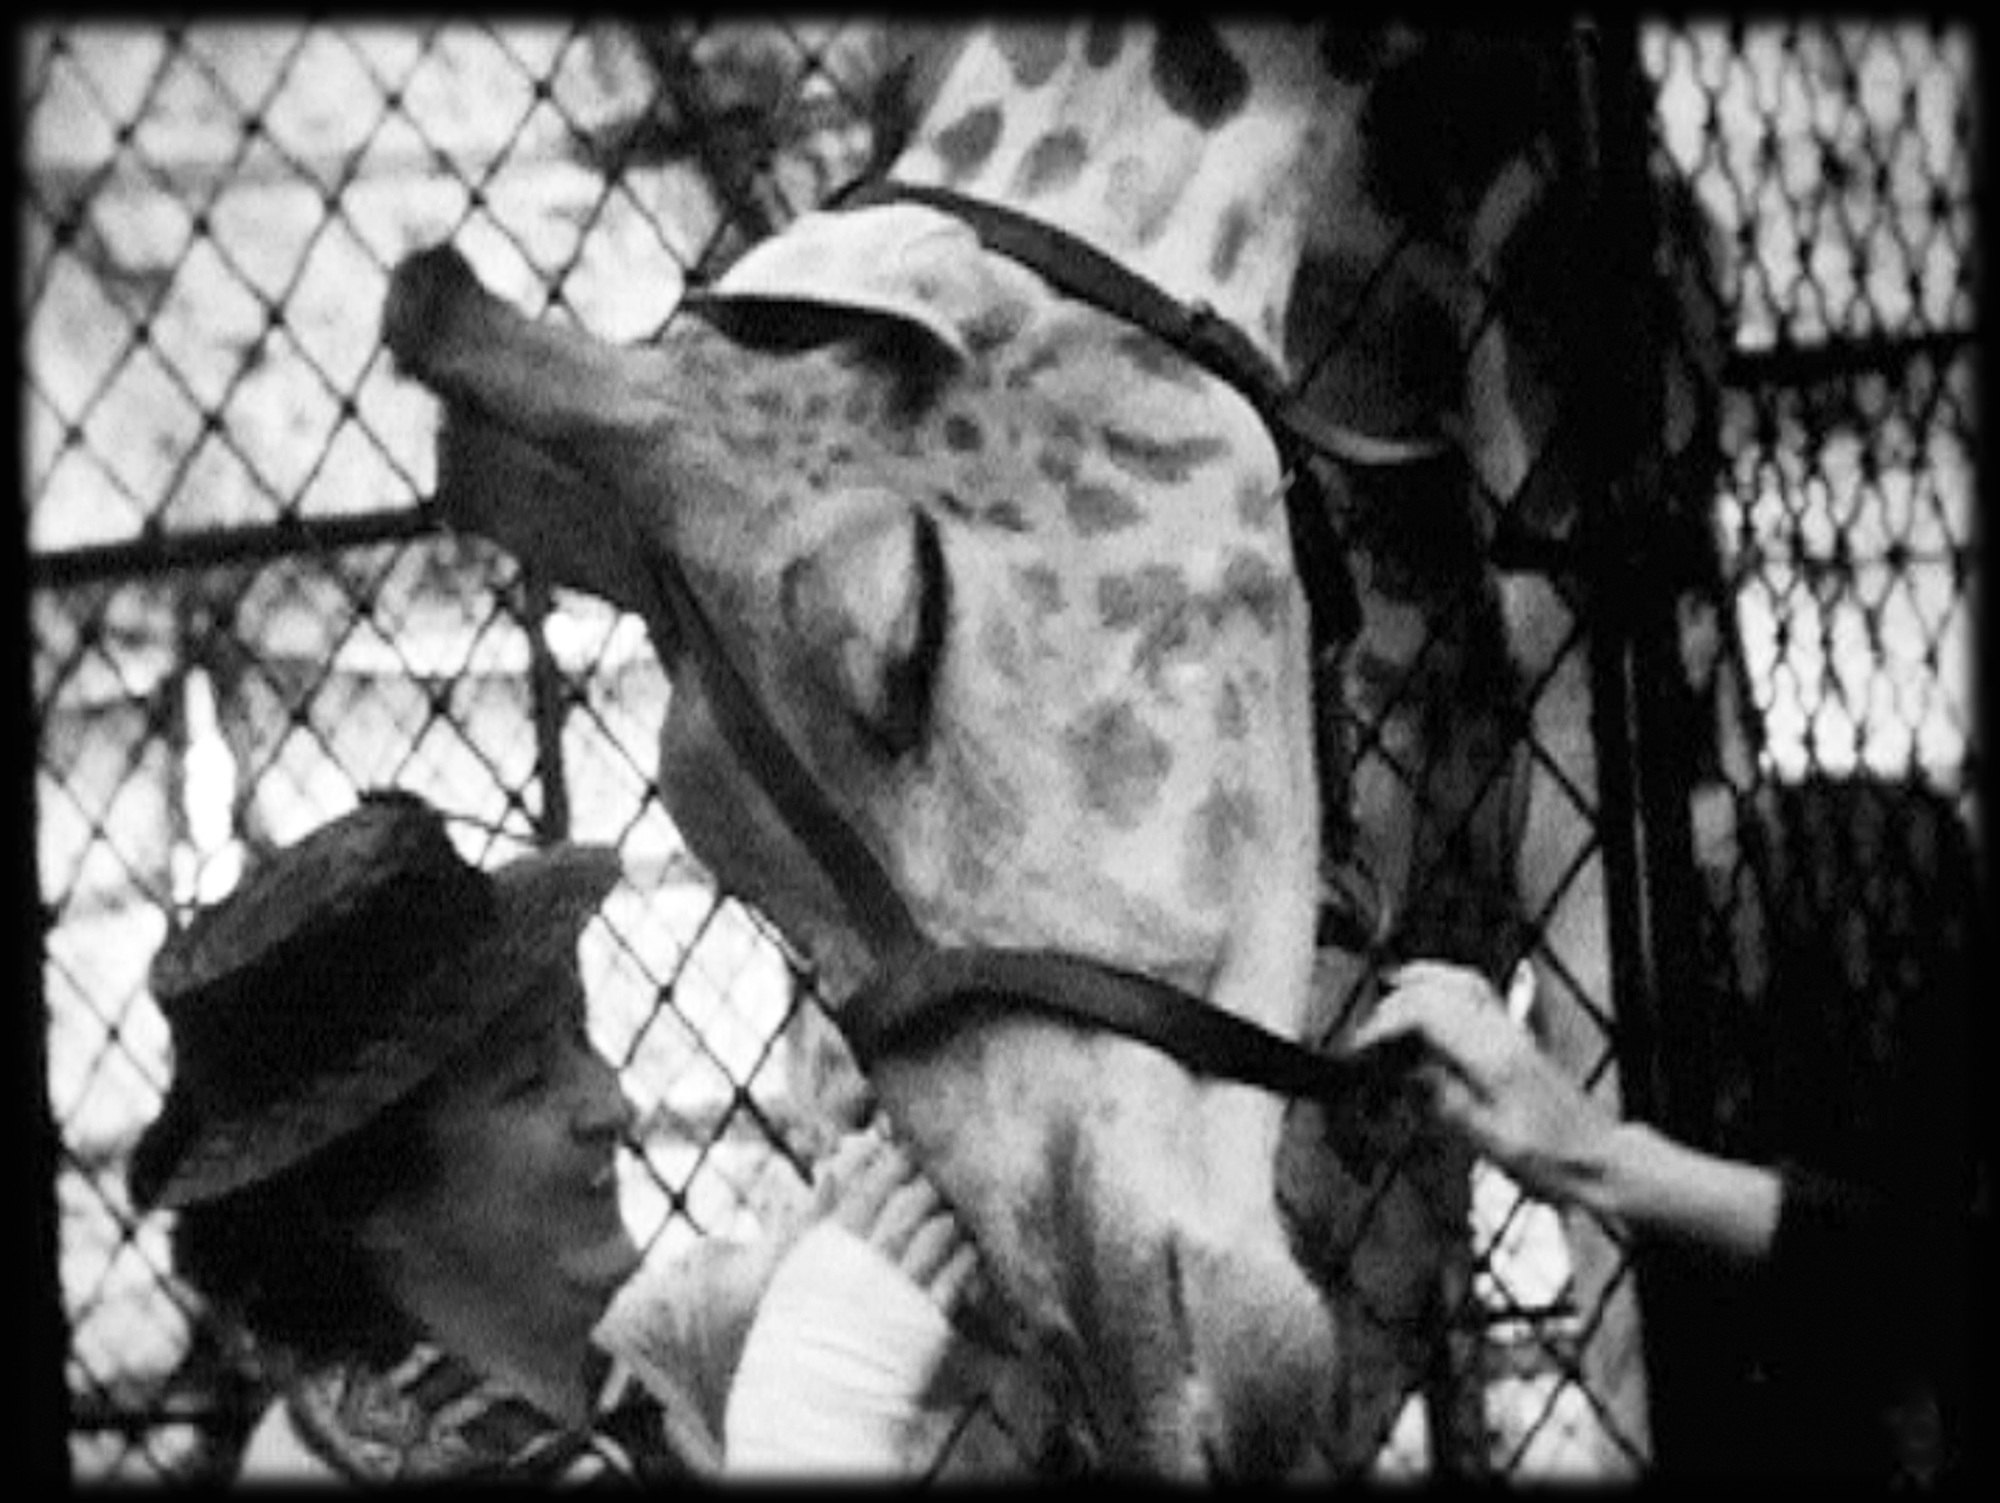 A Ringling Bros. audience member pets a giraffe before a performance in one of the photos from Siegfried's collection. Color film wasn’t invented until 1935, so this must have been taken by Chapin in the '20s or early-mid '30s.